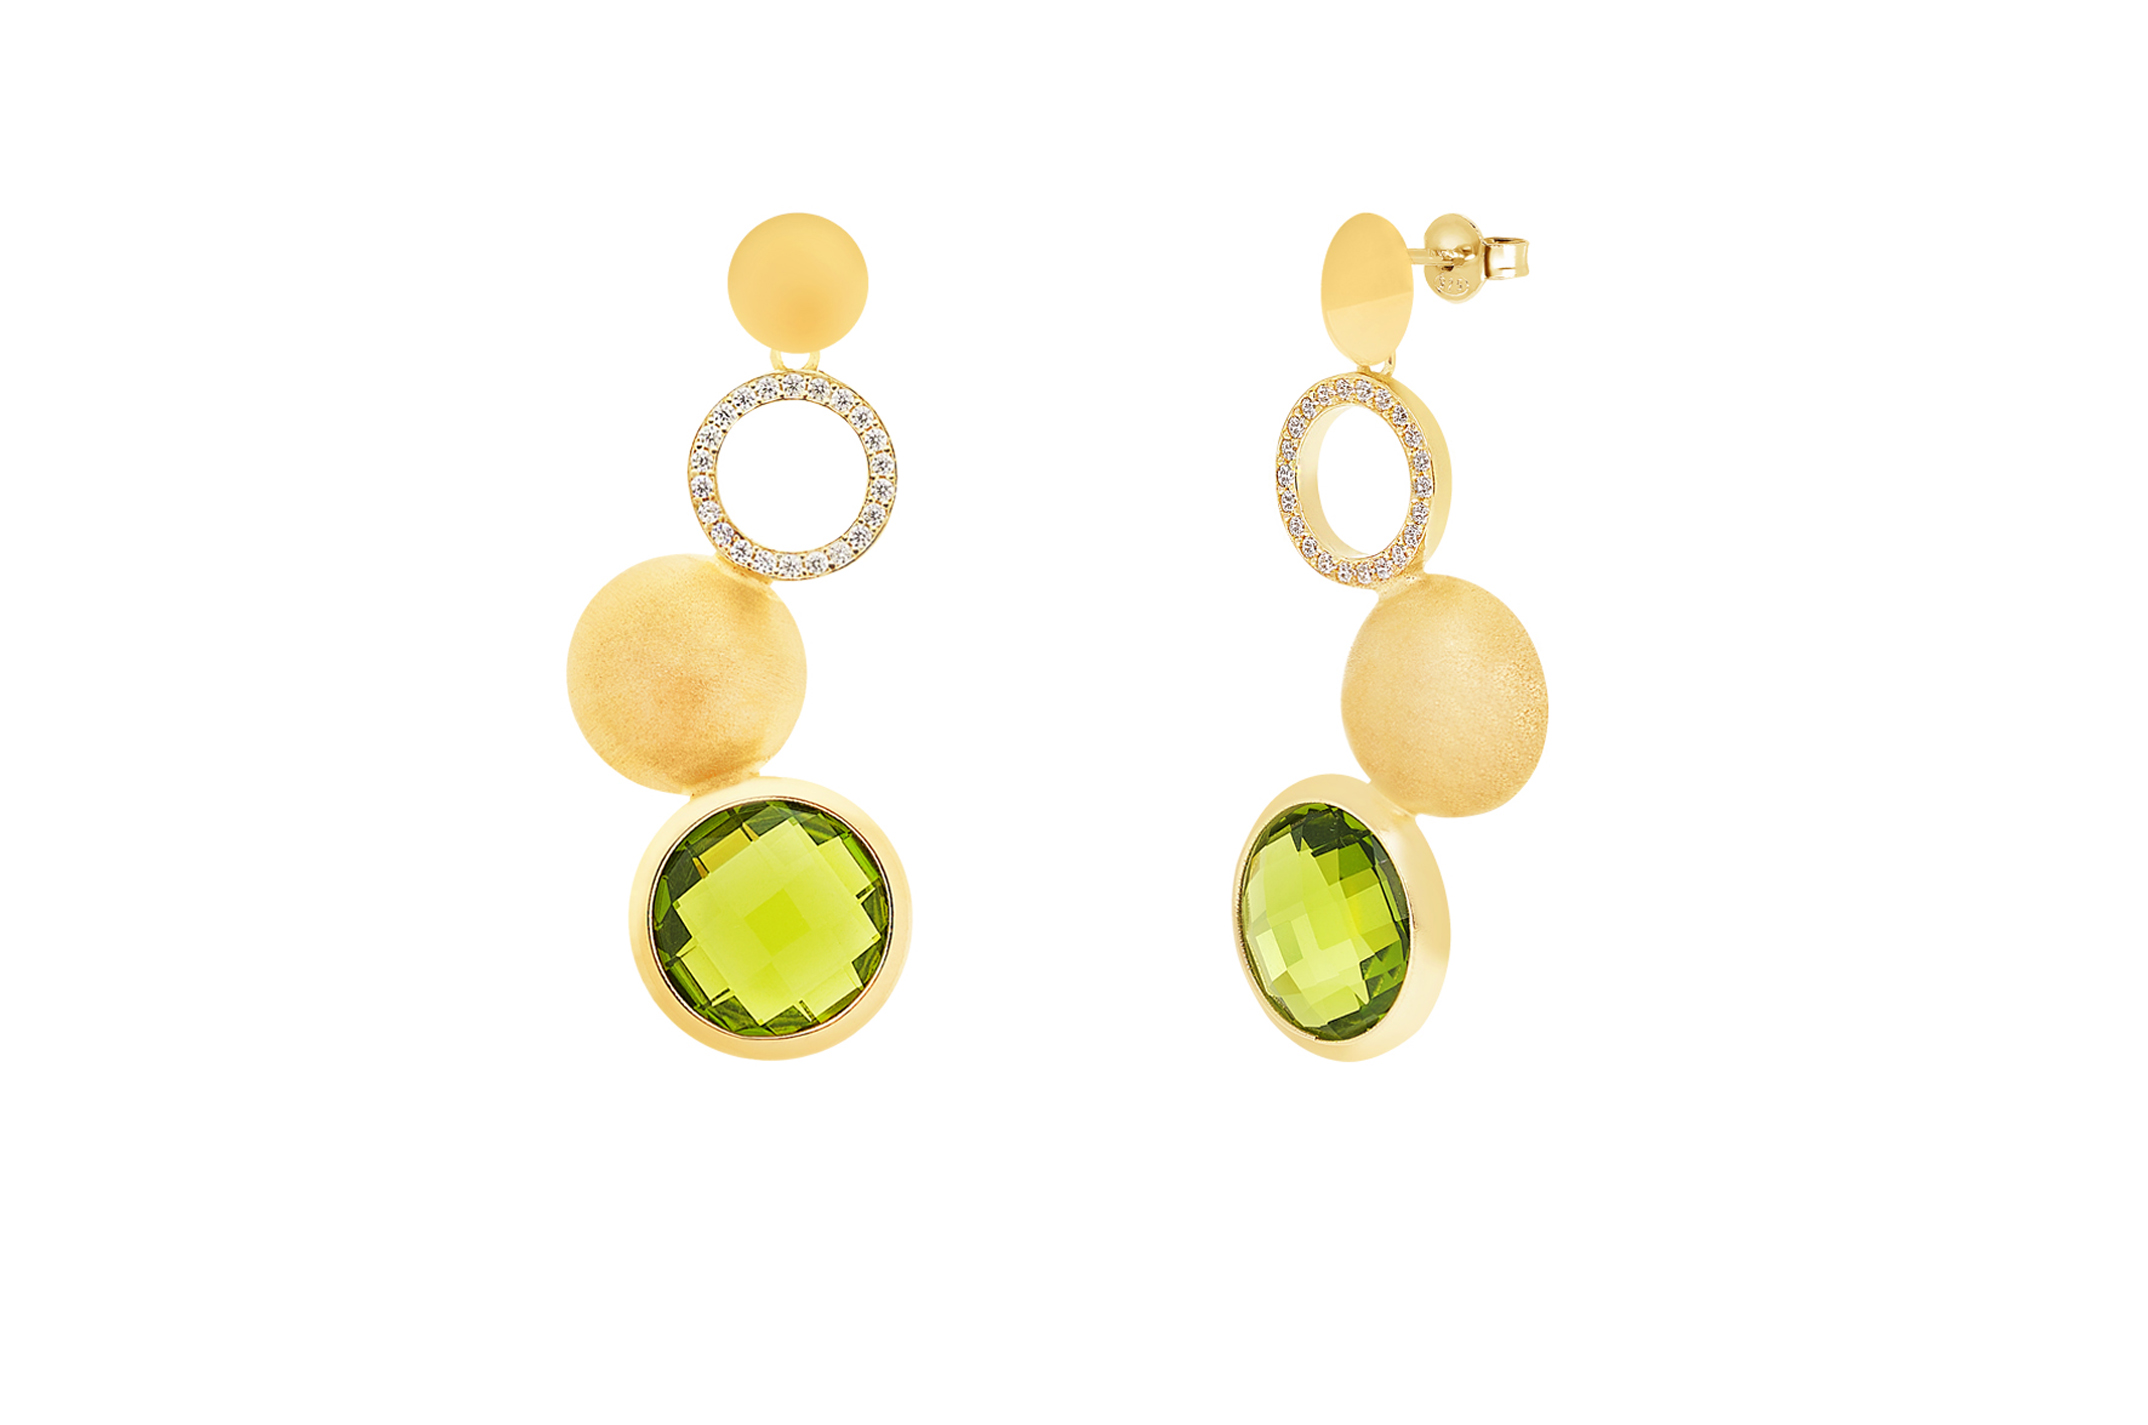 Jewel: earrings;Material: silver 925;Weight: 6.3 gr;Stone: zirconia;Color: yellow;Size: 4.5 cm